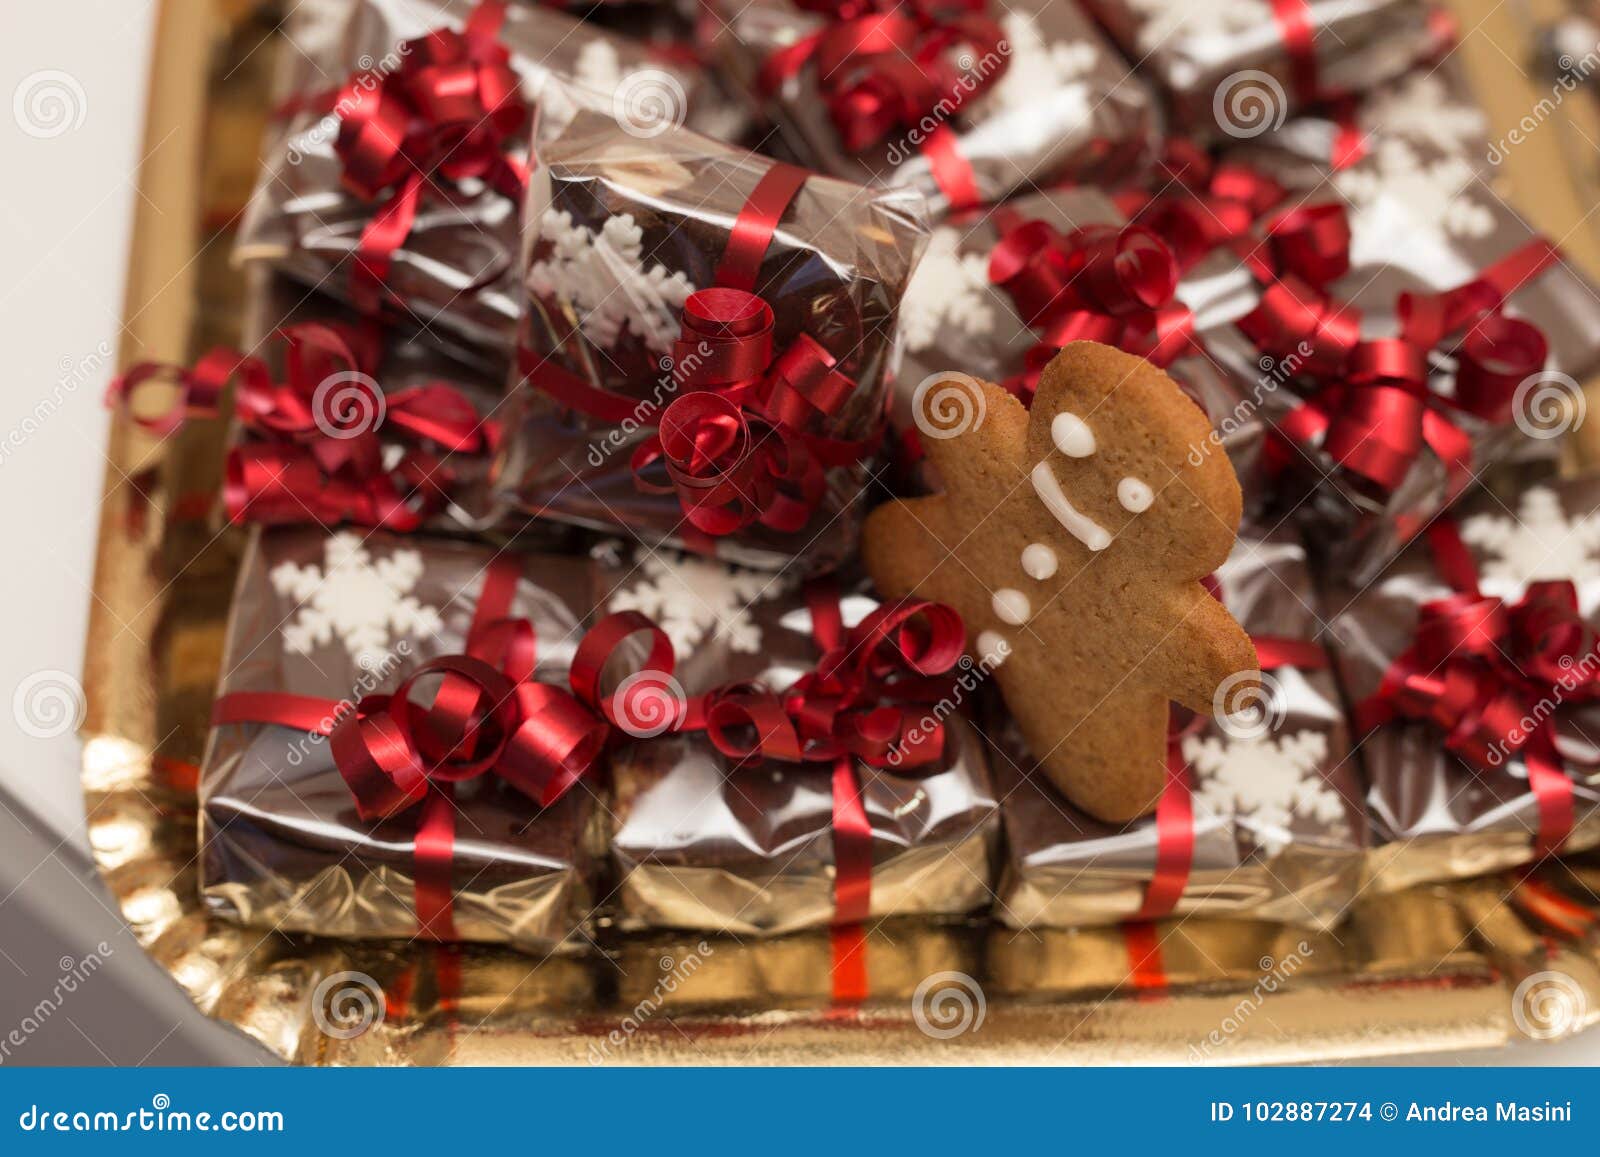 Download Christmas cakes stock photo Image of handmade icing